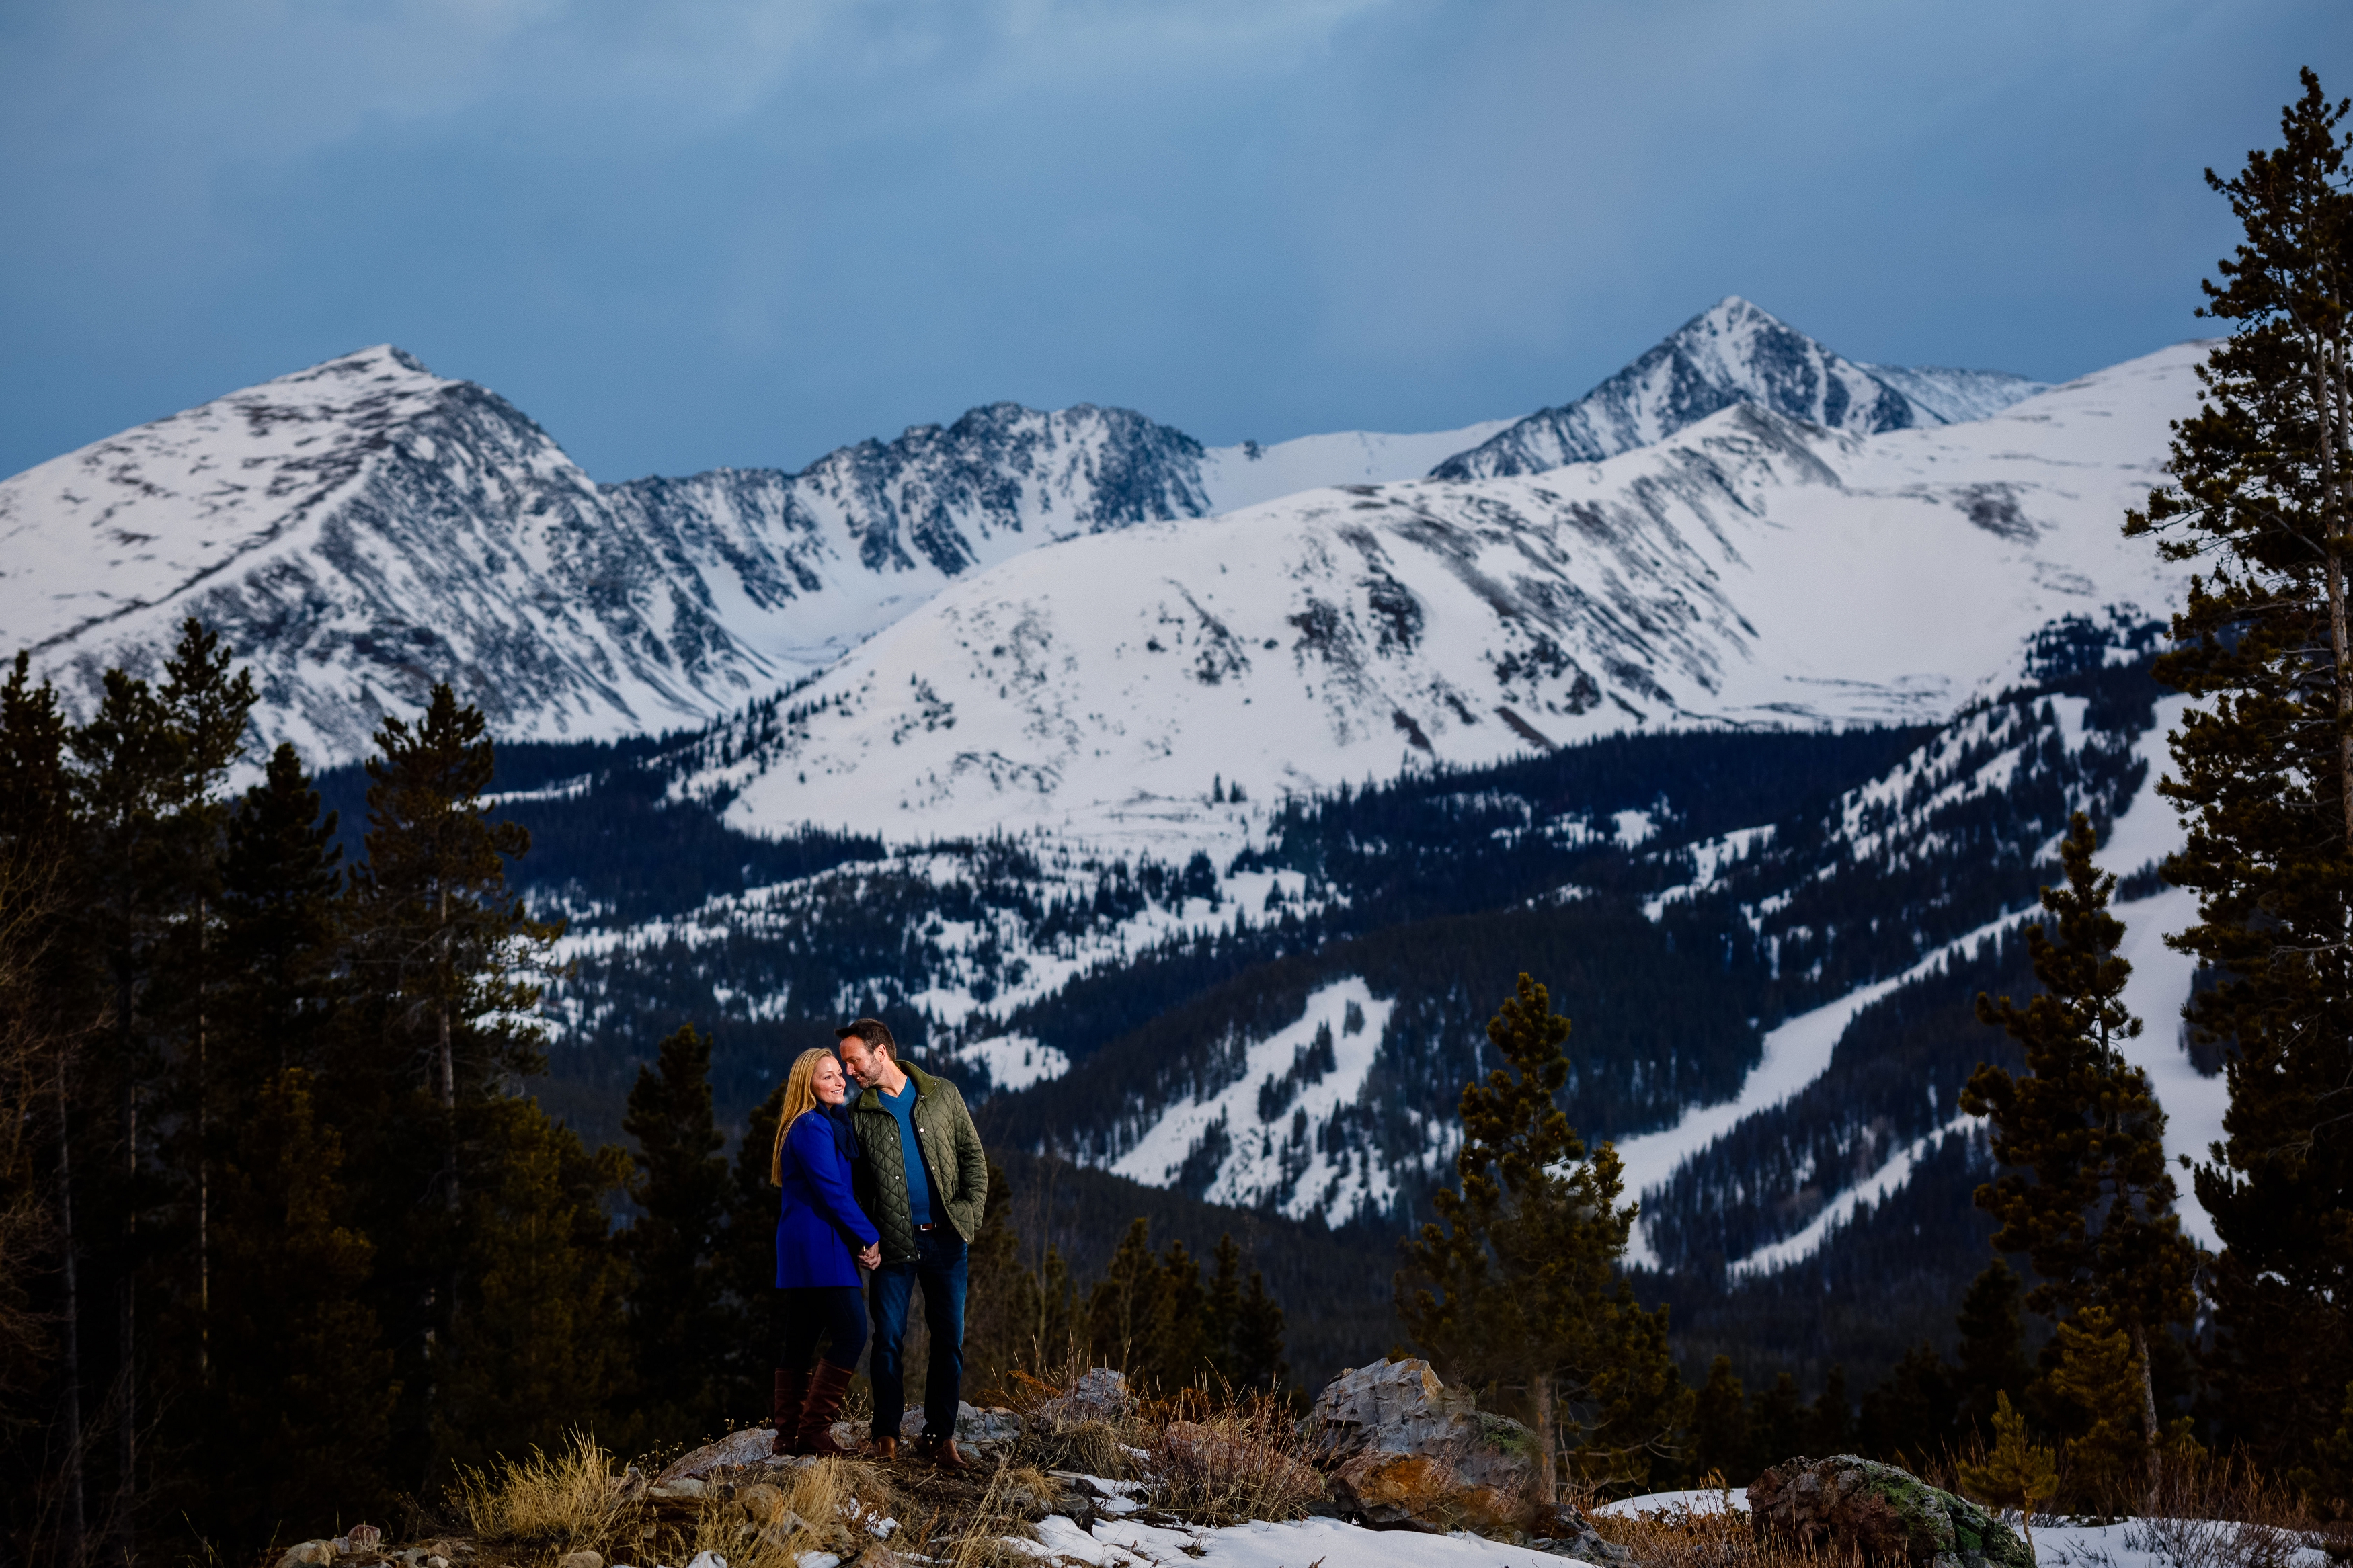 The Tenmile Range serves as an epic backdrop for TJ & Donna's Breckenridge Spring Engagement.